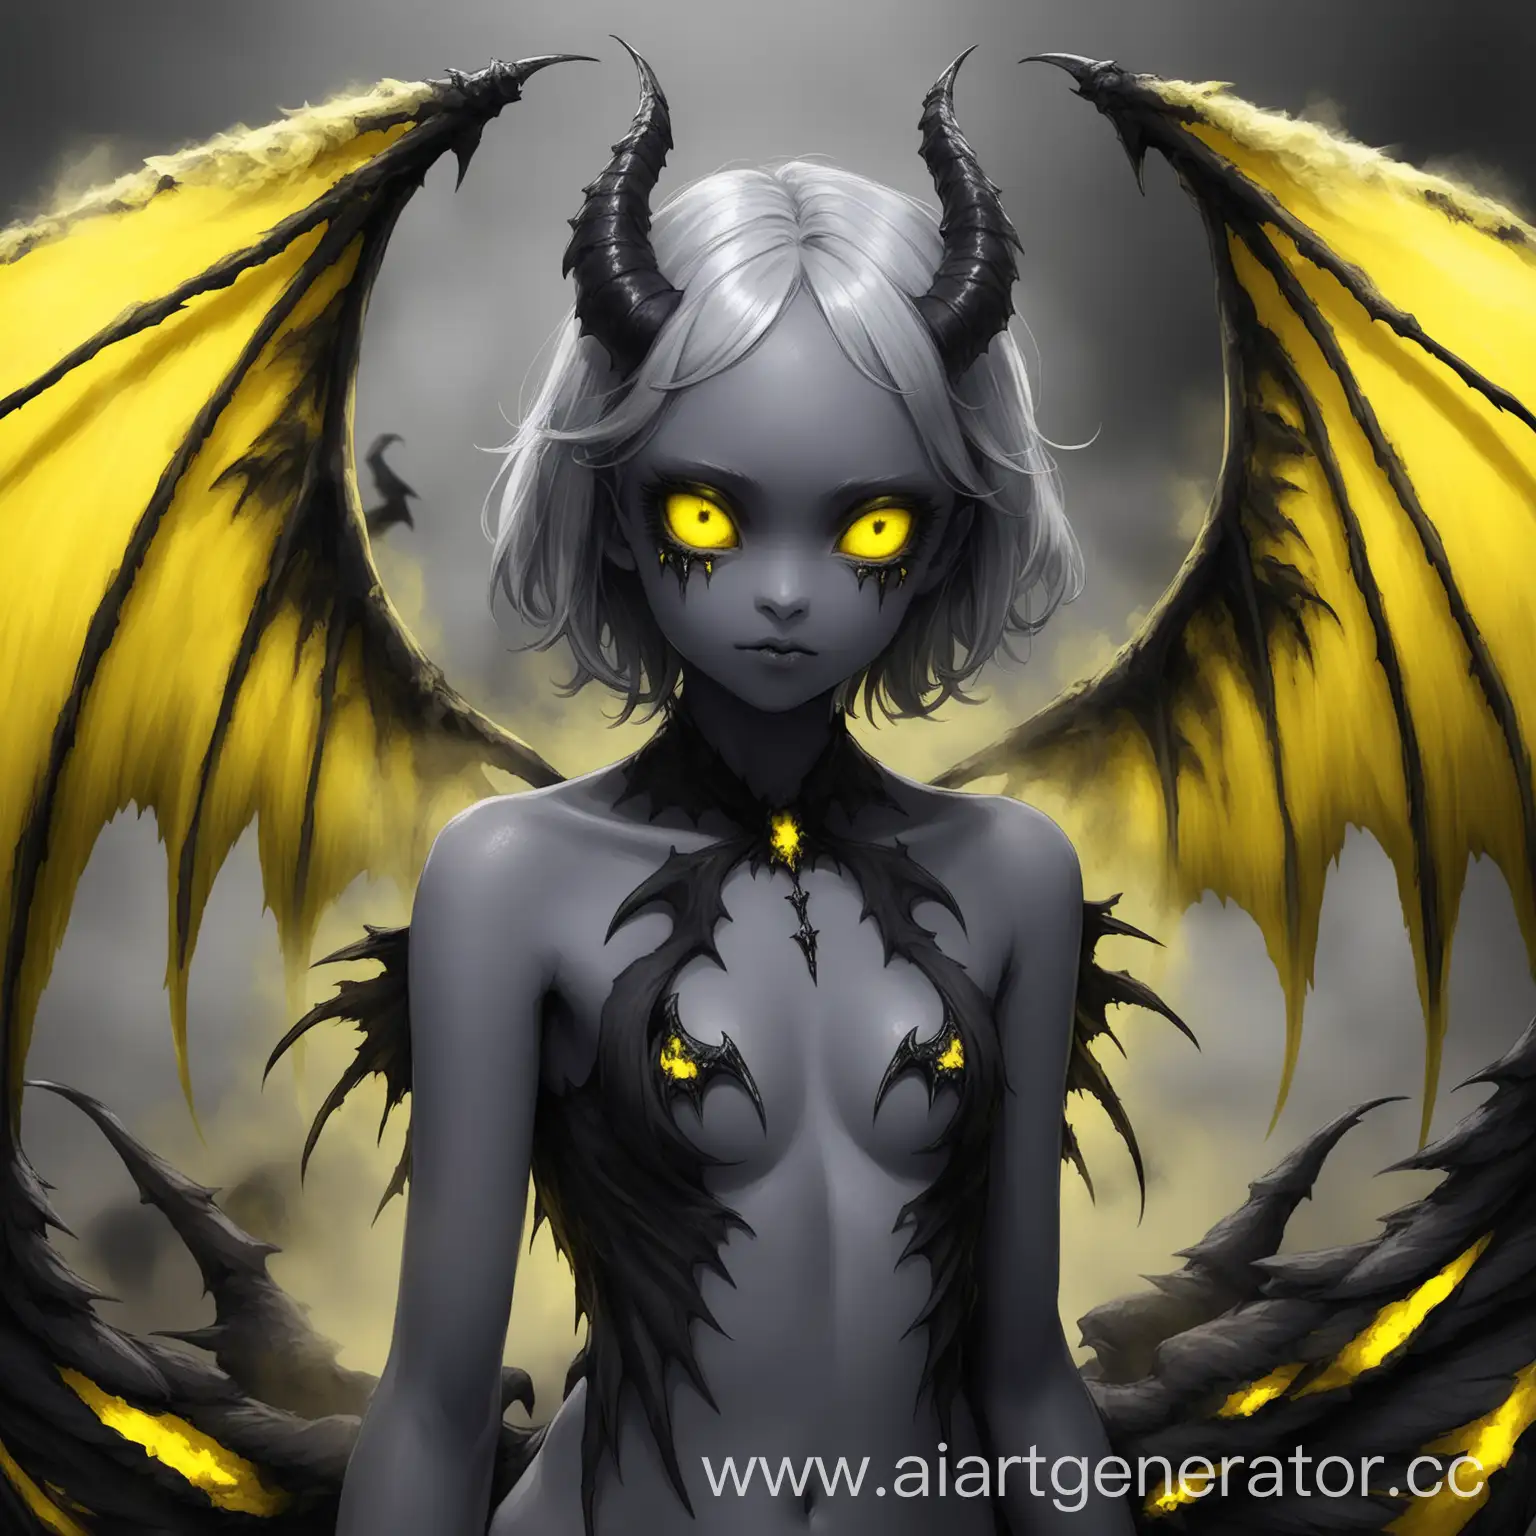 Demon-with-Gray-Skin-and-Sulfur-Eyes-and-Wings